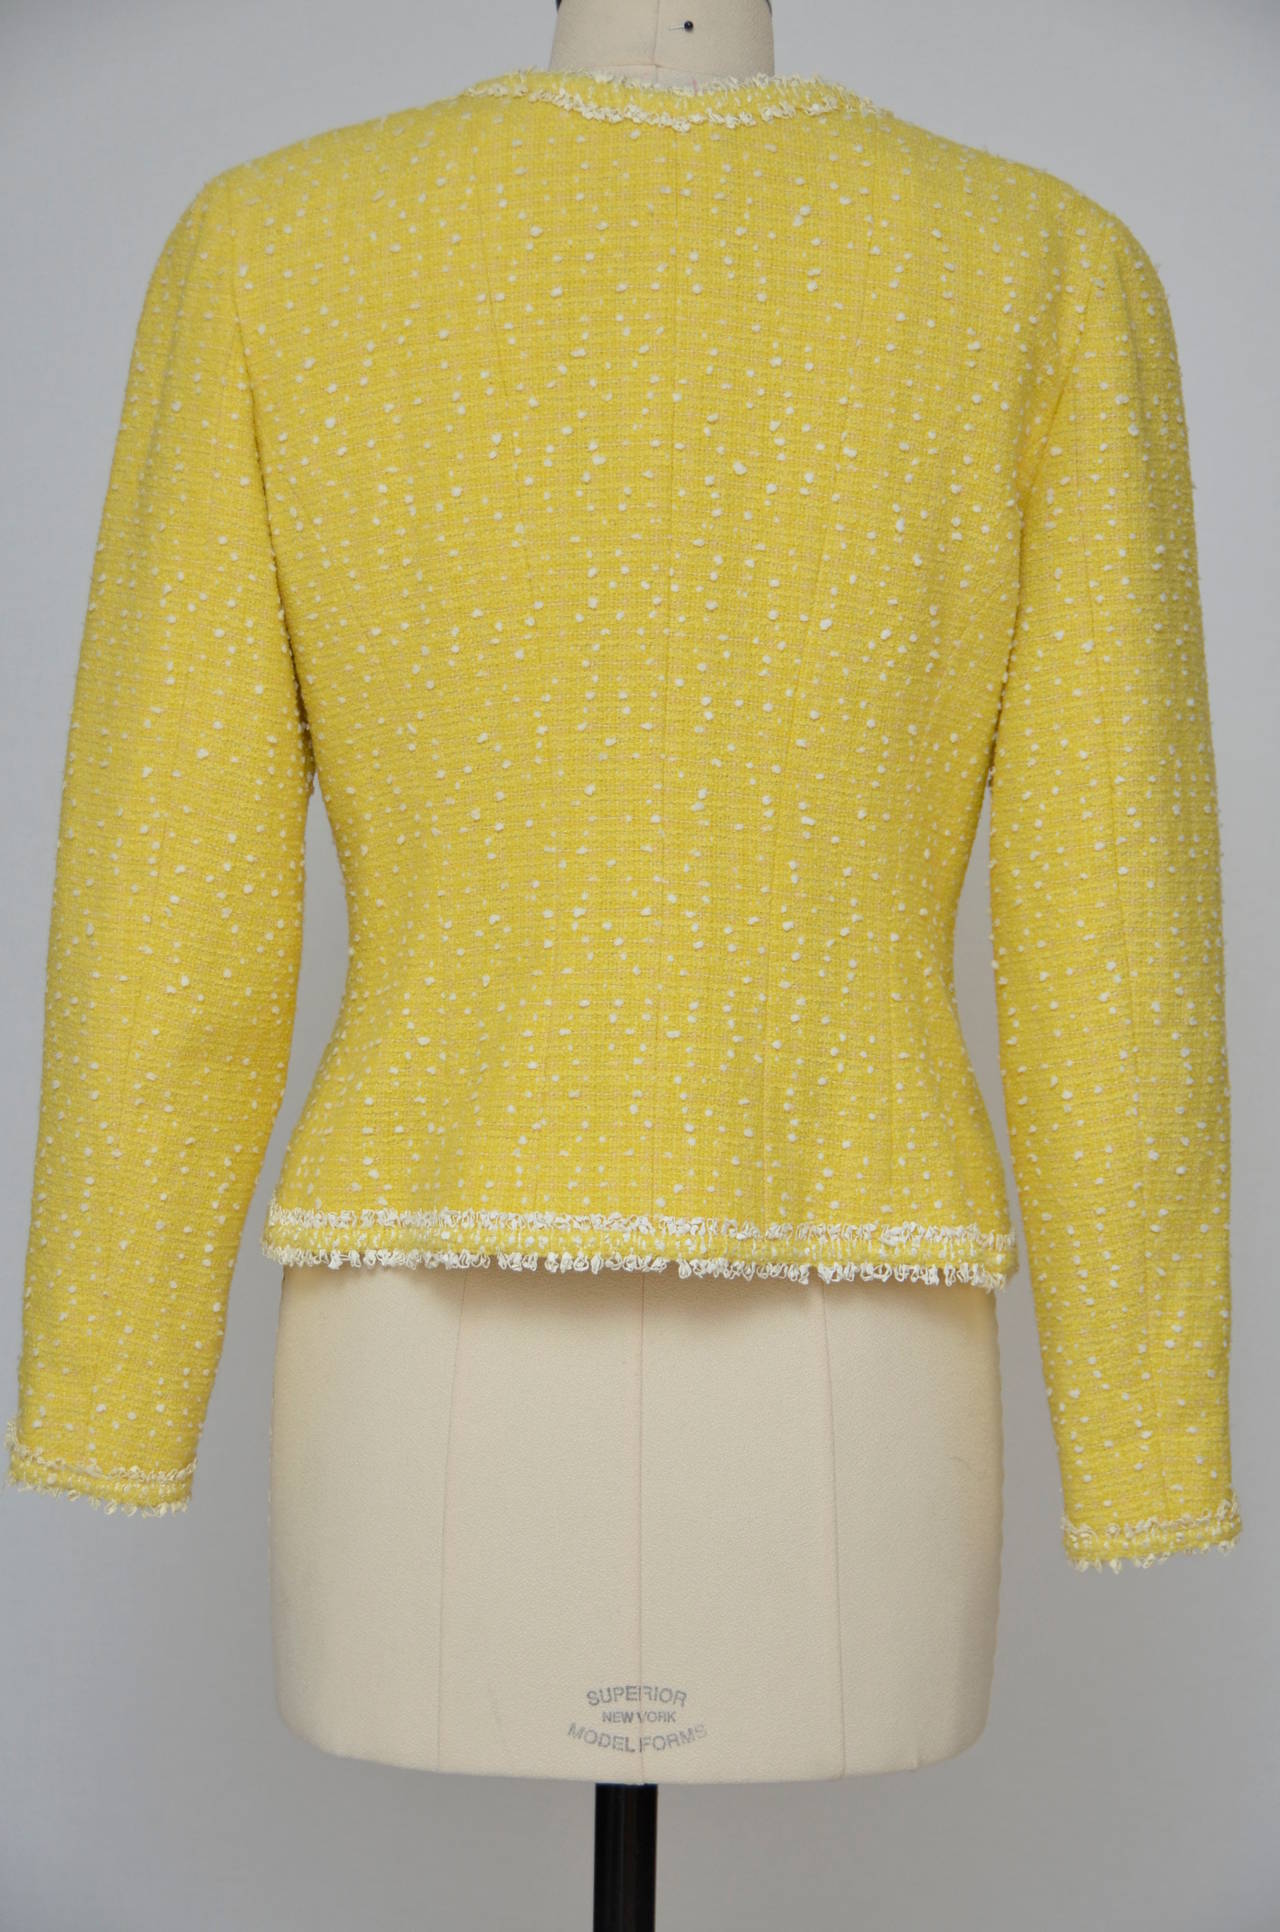 Quintessential Chanel, but in an unexpected bright pop of yellow! This Chanel Boutique  jacket is from Spring 1997.
Cotton/wool blend boucle in sunny lemon yellow with slubs of white in the weave. The fitted jacket is accented with braid at the